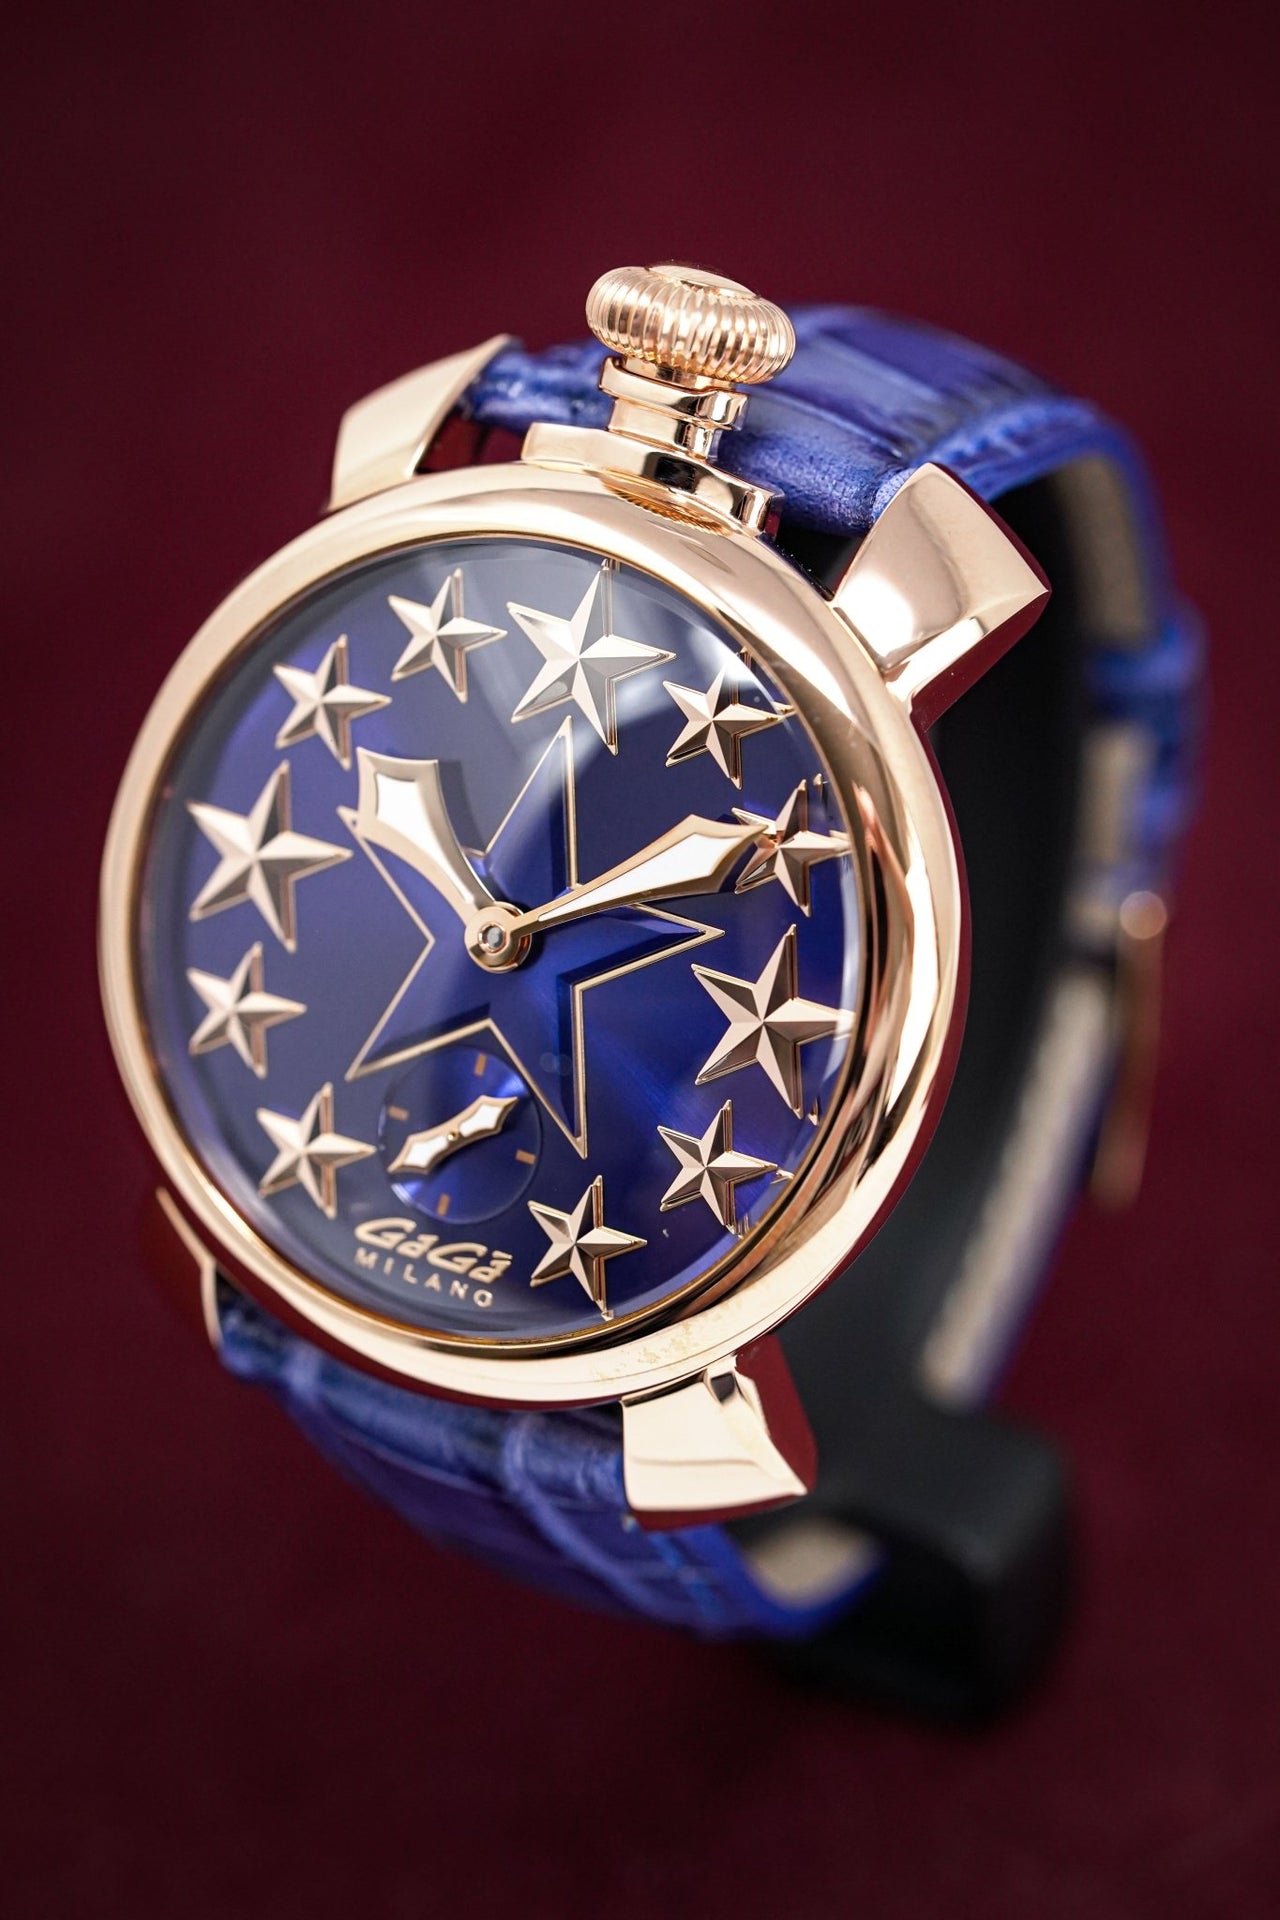 GaGà Milano Manuale 48MM Men's Watch Stars Blue - Watches & Crystals